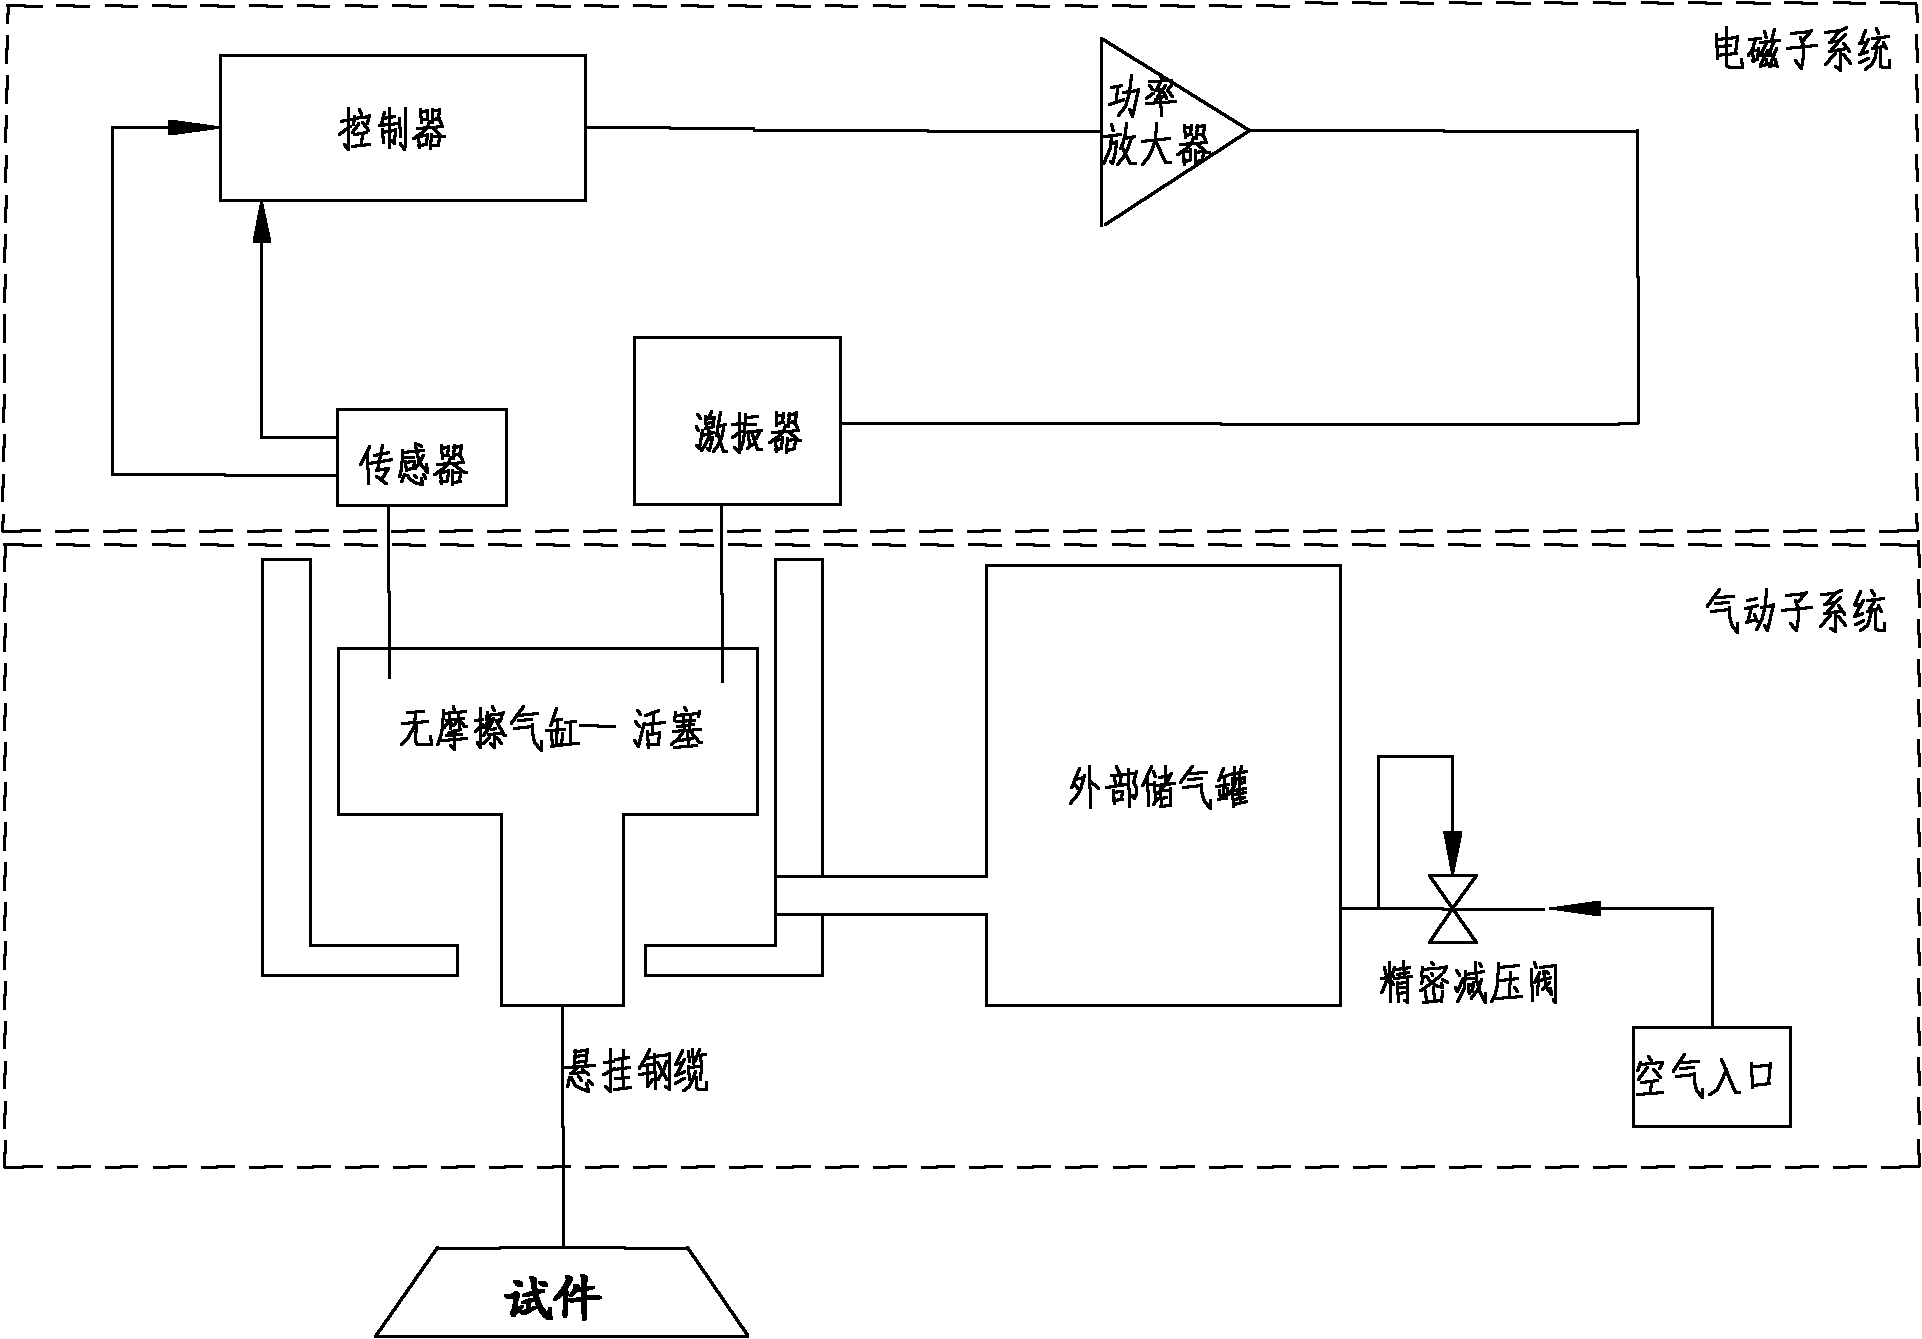 Ultra-low frequency modal test suspension system